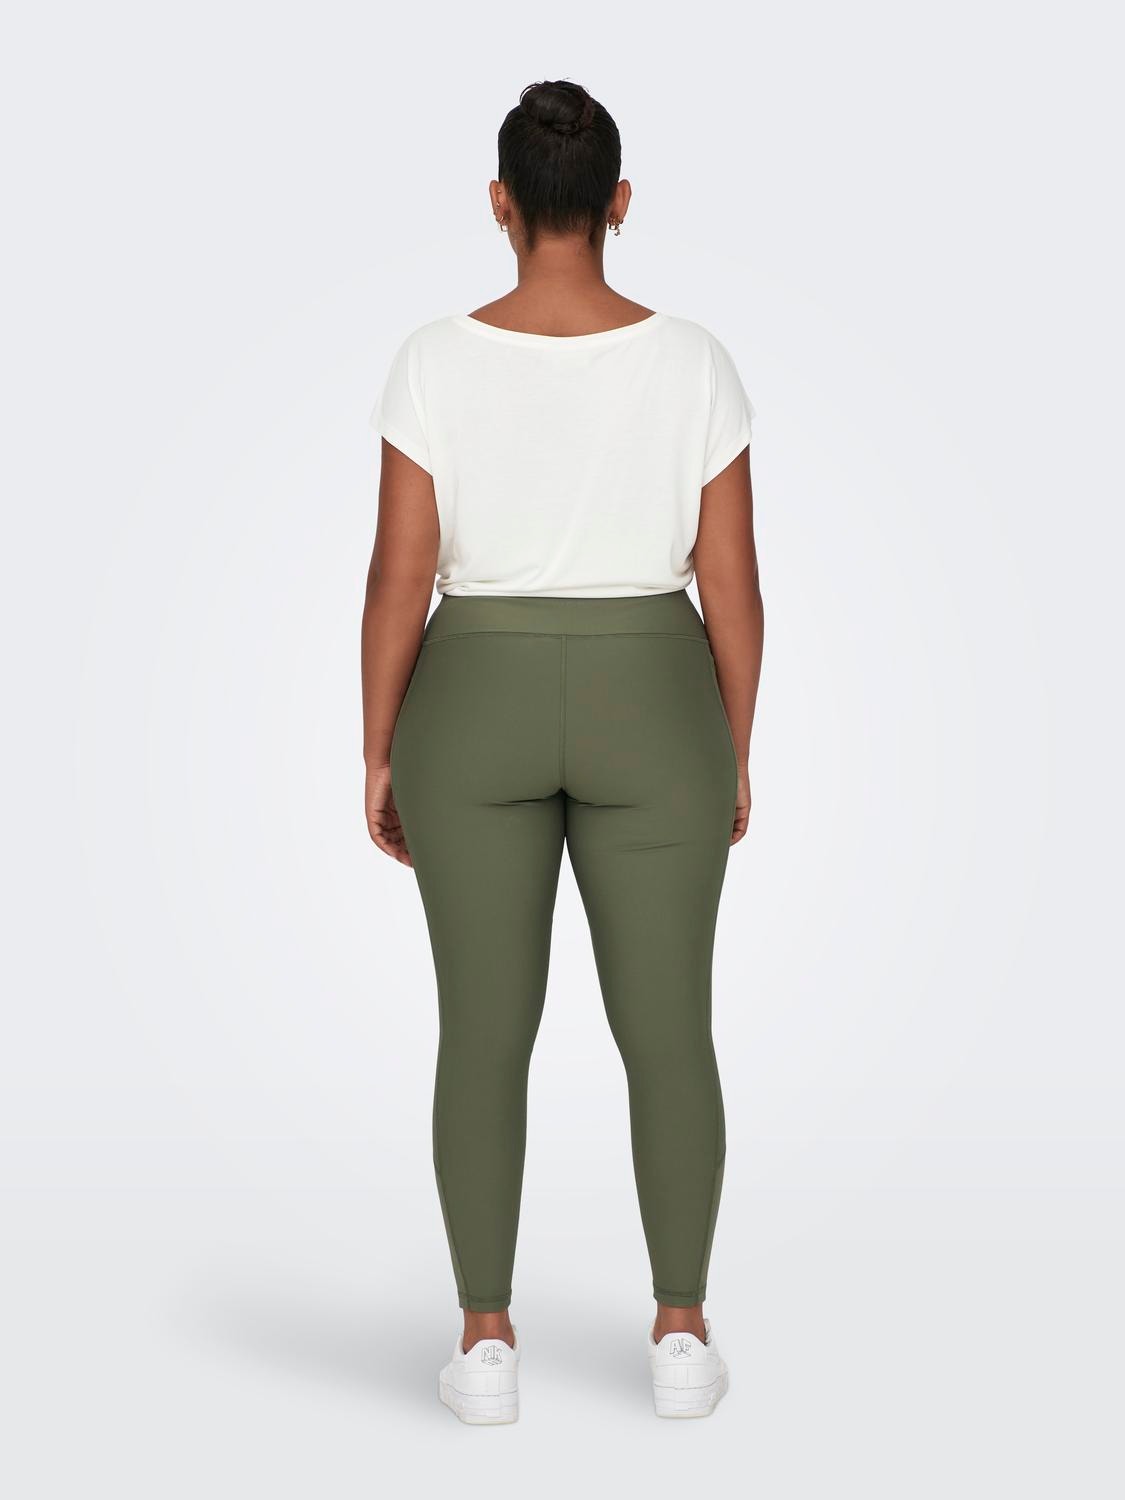 ONLY Tight Fit High waist Curve Leggings -Dusty Olive - 15276824